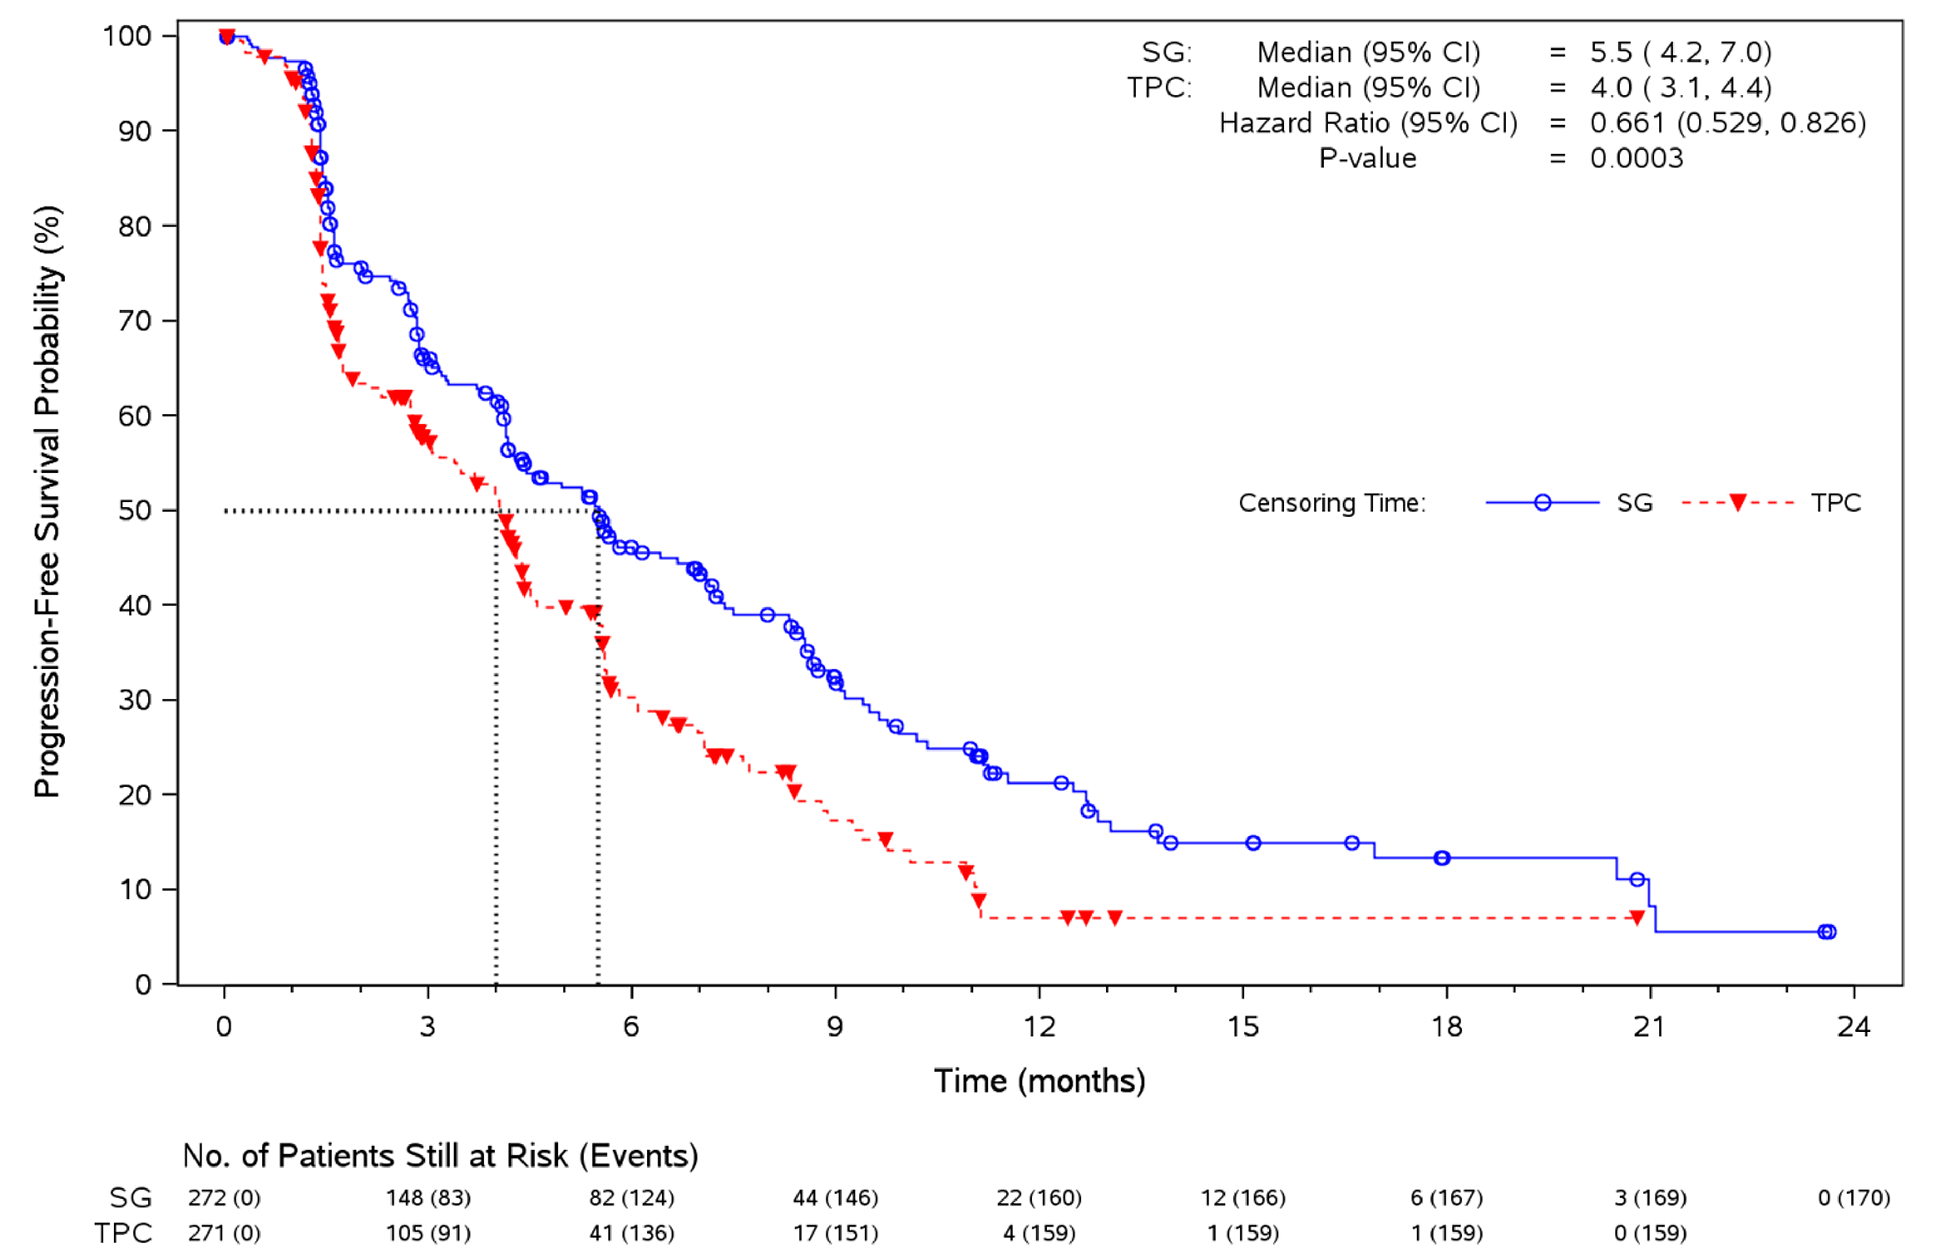 The sacituzumab govitecan and TPC curves separate approximately 1 month after randomization through the remainder of patient follow-up. The landmark estimates of the proportion of patients alive at 6 months were 46% (95% CI, 39 to 53) in the sacituzumab govitecan group and 30% (95% CI, 24 to 37) in the TPC group. At 12 months, the KM estimates were 21% (95% CI, 15 to 28) in the sacituzumab govitecan group and 7% (95% CI, 3 to 14) in the TPC group.